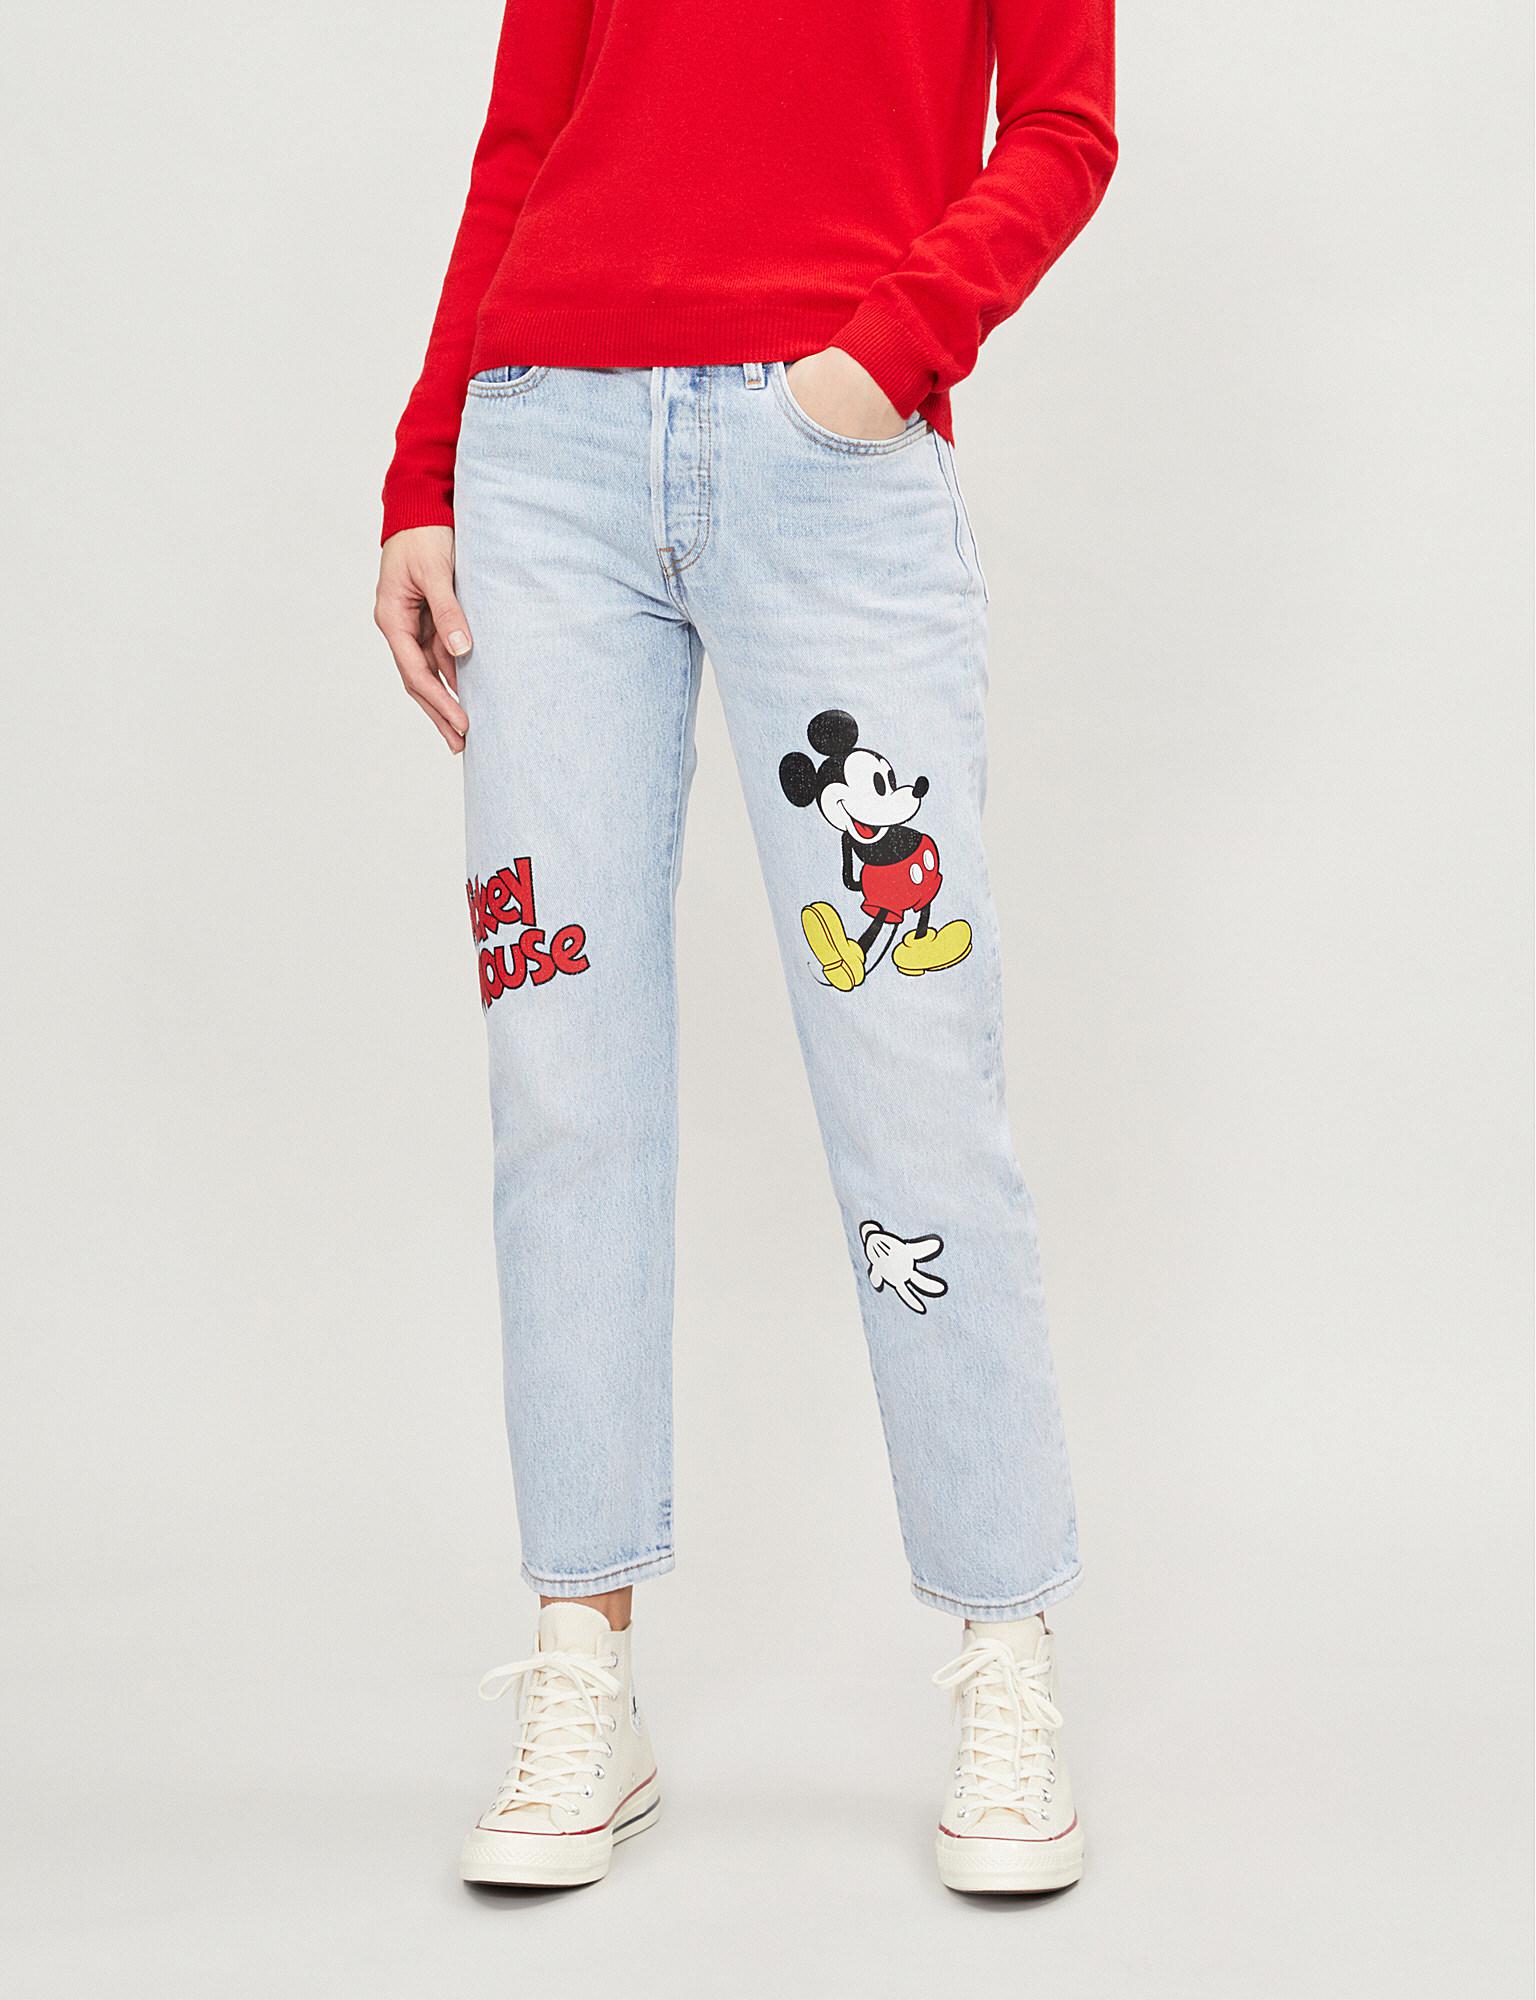 jeans mickey mouse levis, Off 73%, www.scrimaglio.com